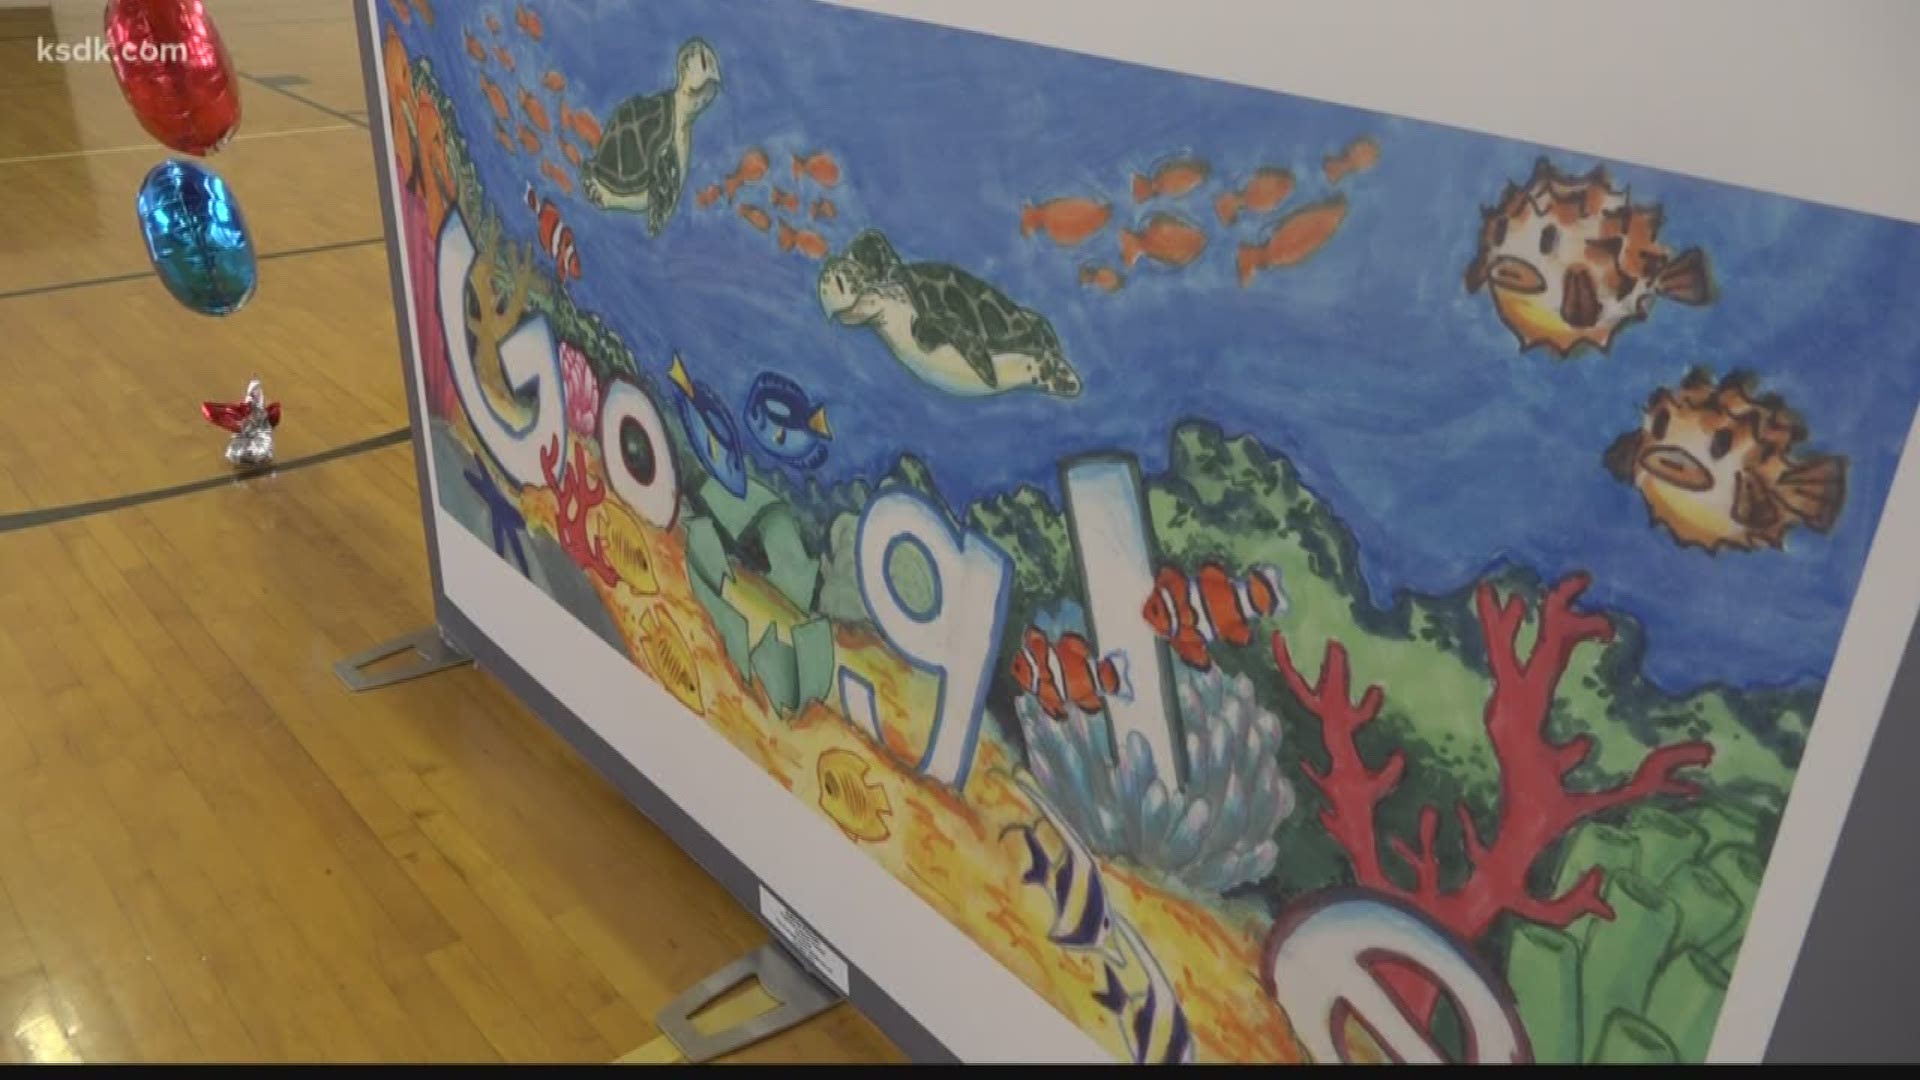 Aubree Pittman has advanced in the ‘Doodle for Google’ competition. She'll represent Missouri in the national competition.